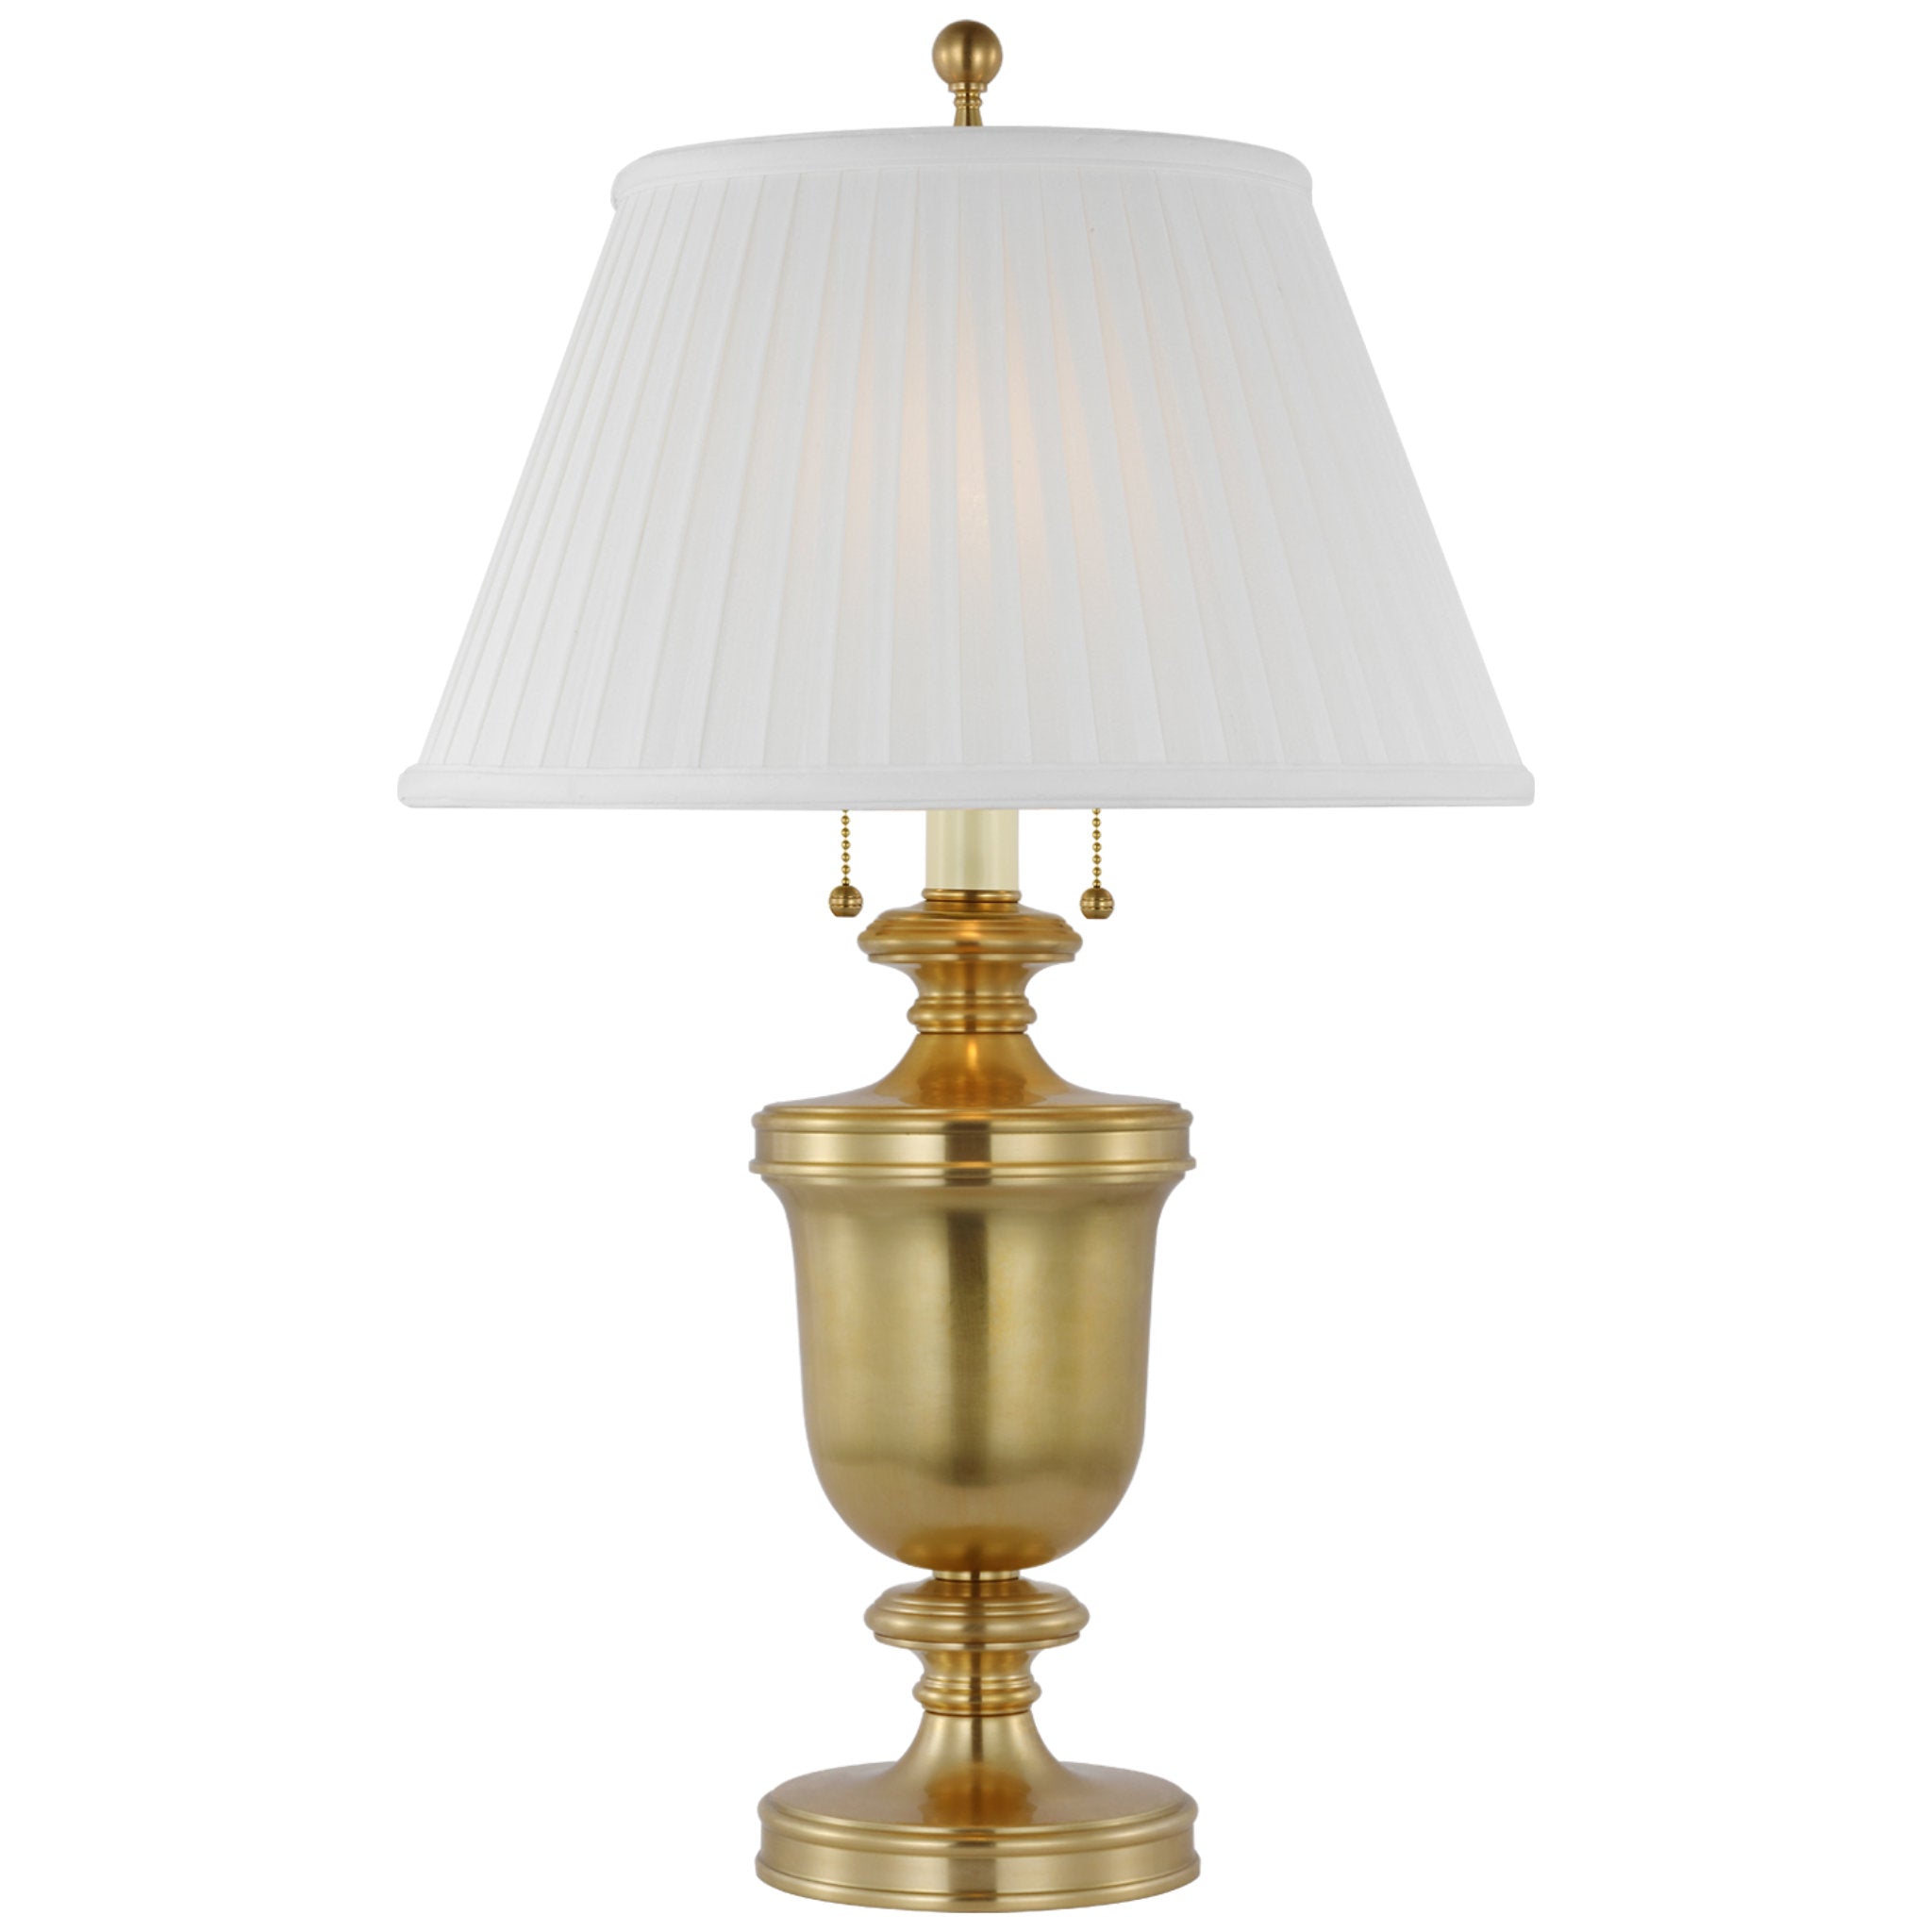 Chapman & Myers Classical Urn Form Medium Table Lamp in Antique-Burnished Brass with Silk Pleat Shade